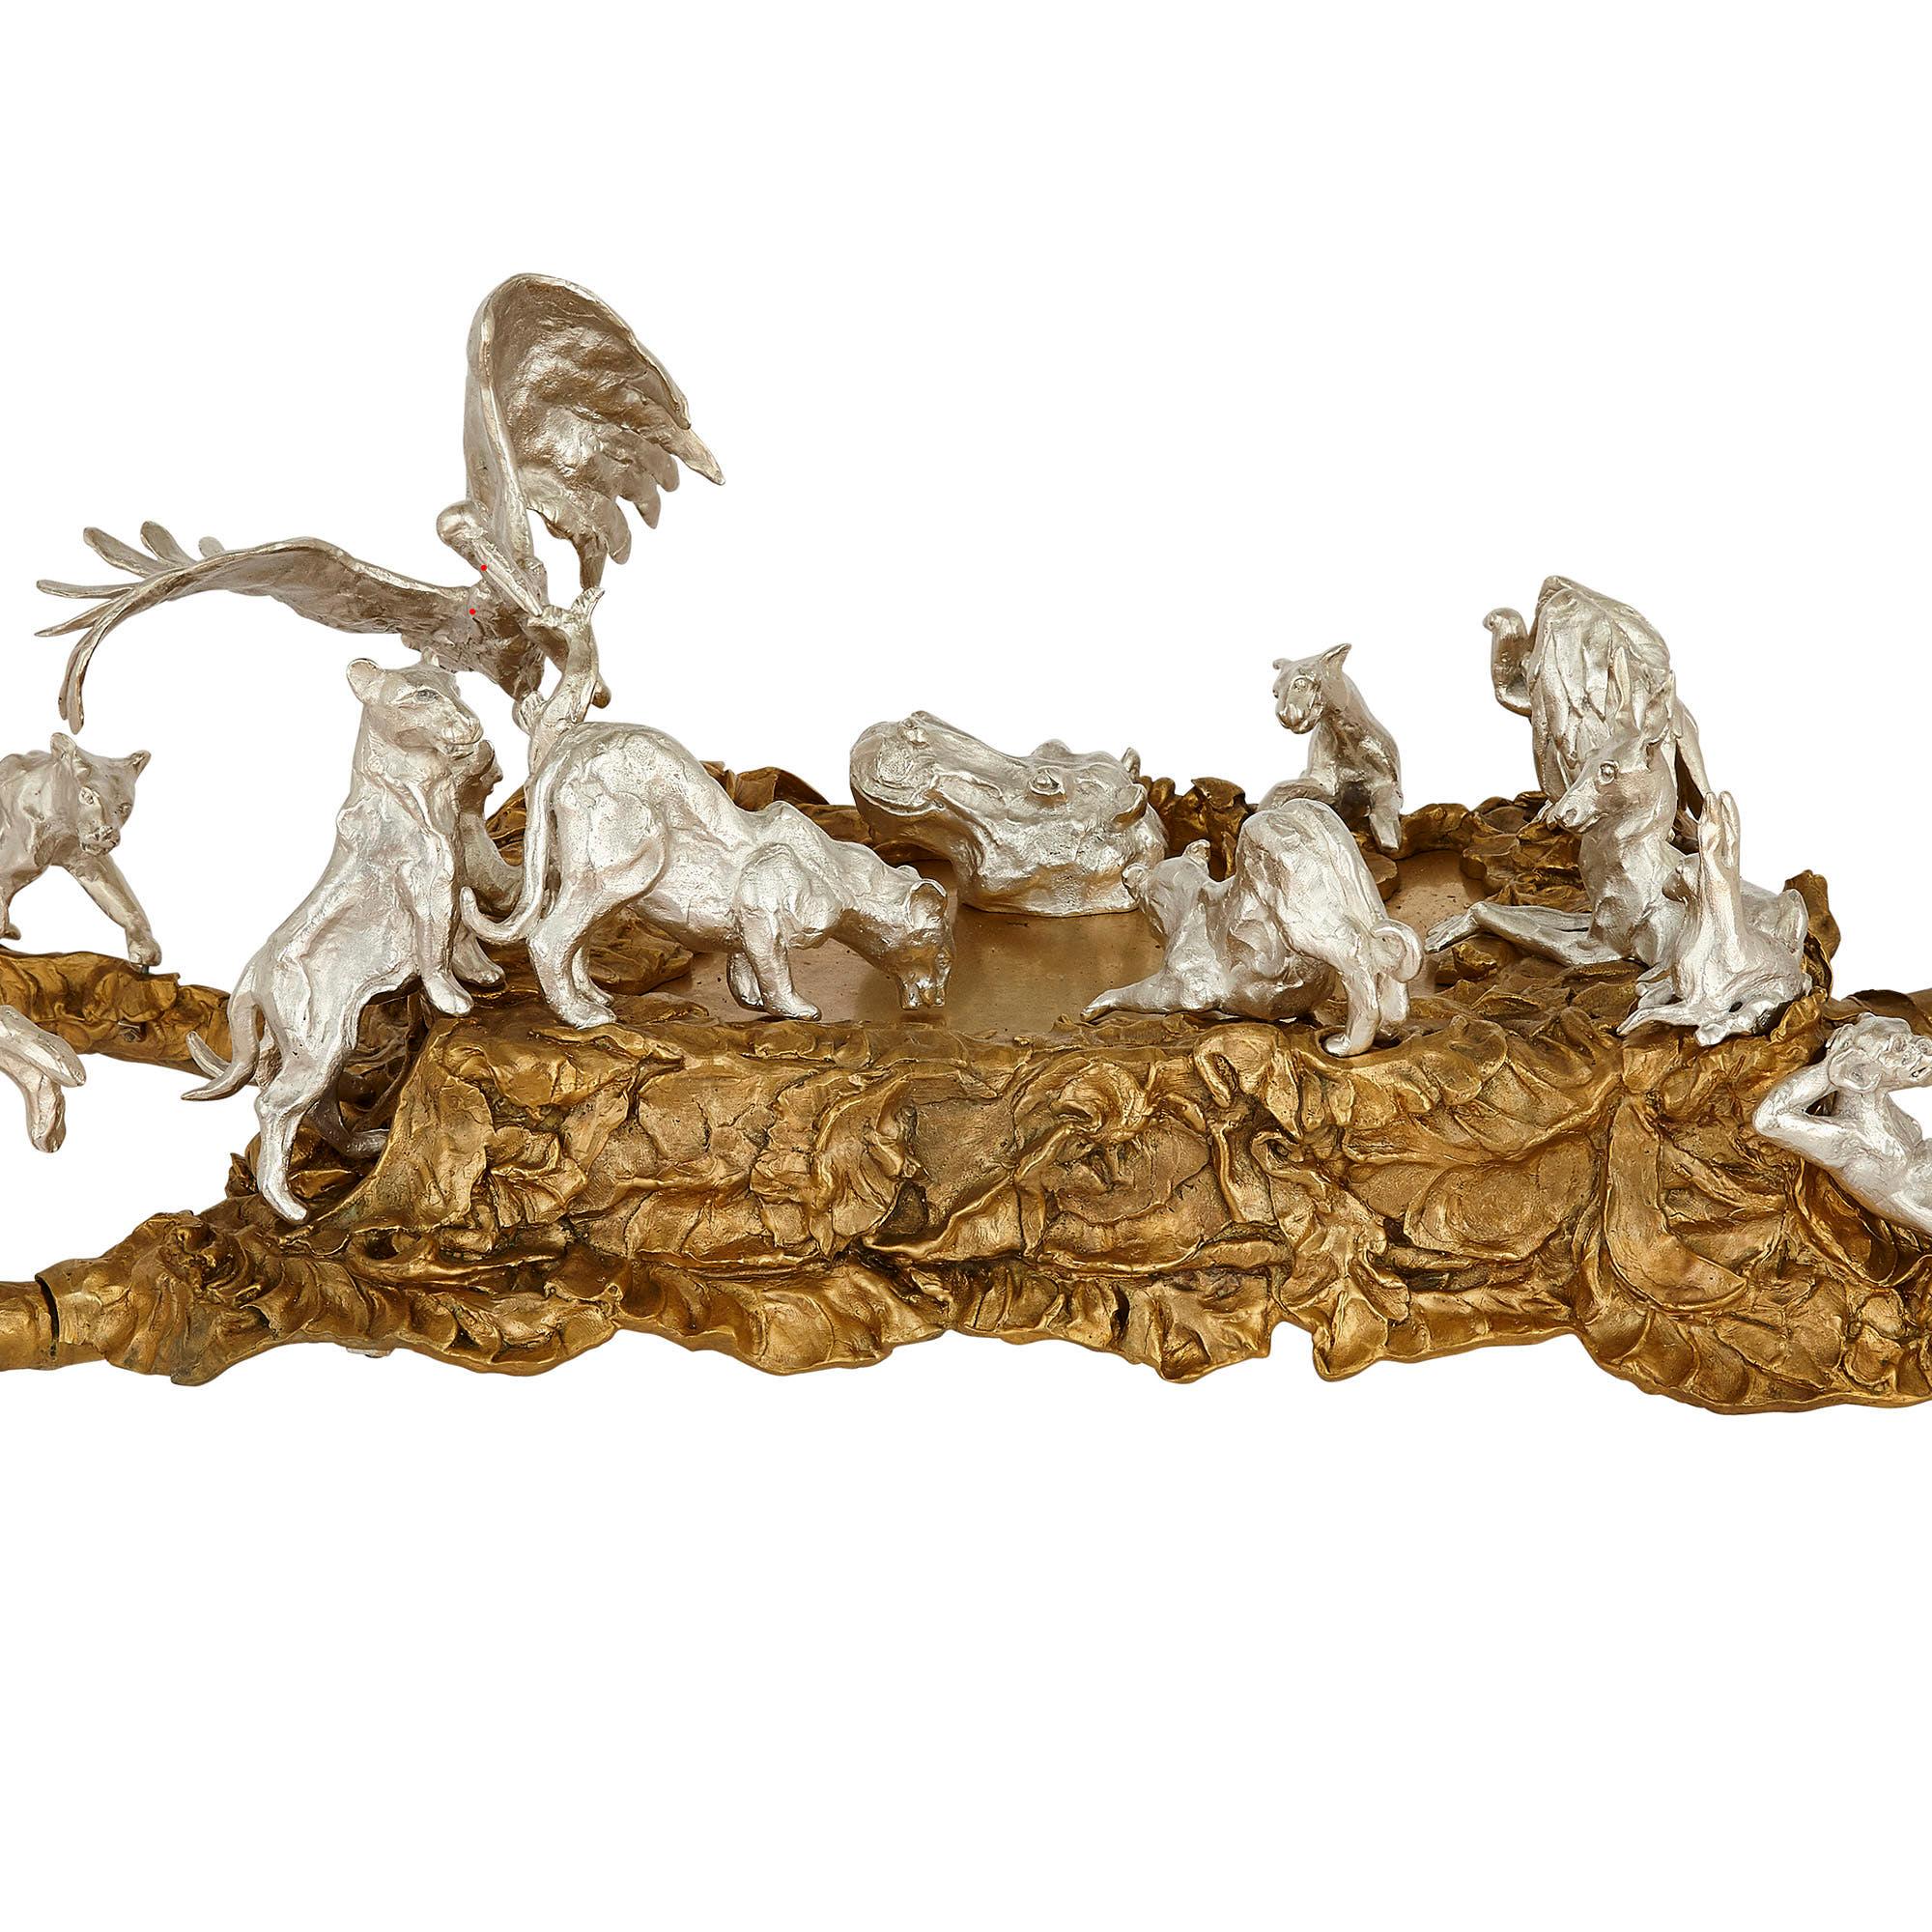 Contemporary gilt and silvered bronze animalier coffee table
Continental, 21st Century
Height 58cm, width 160cm, depth 80cm

This wonderful coffee table is after an example of JM David, an important French sculptor who died in 2015. The table is